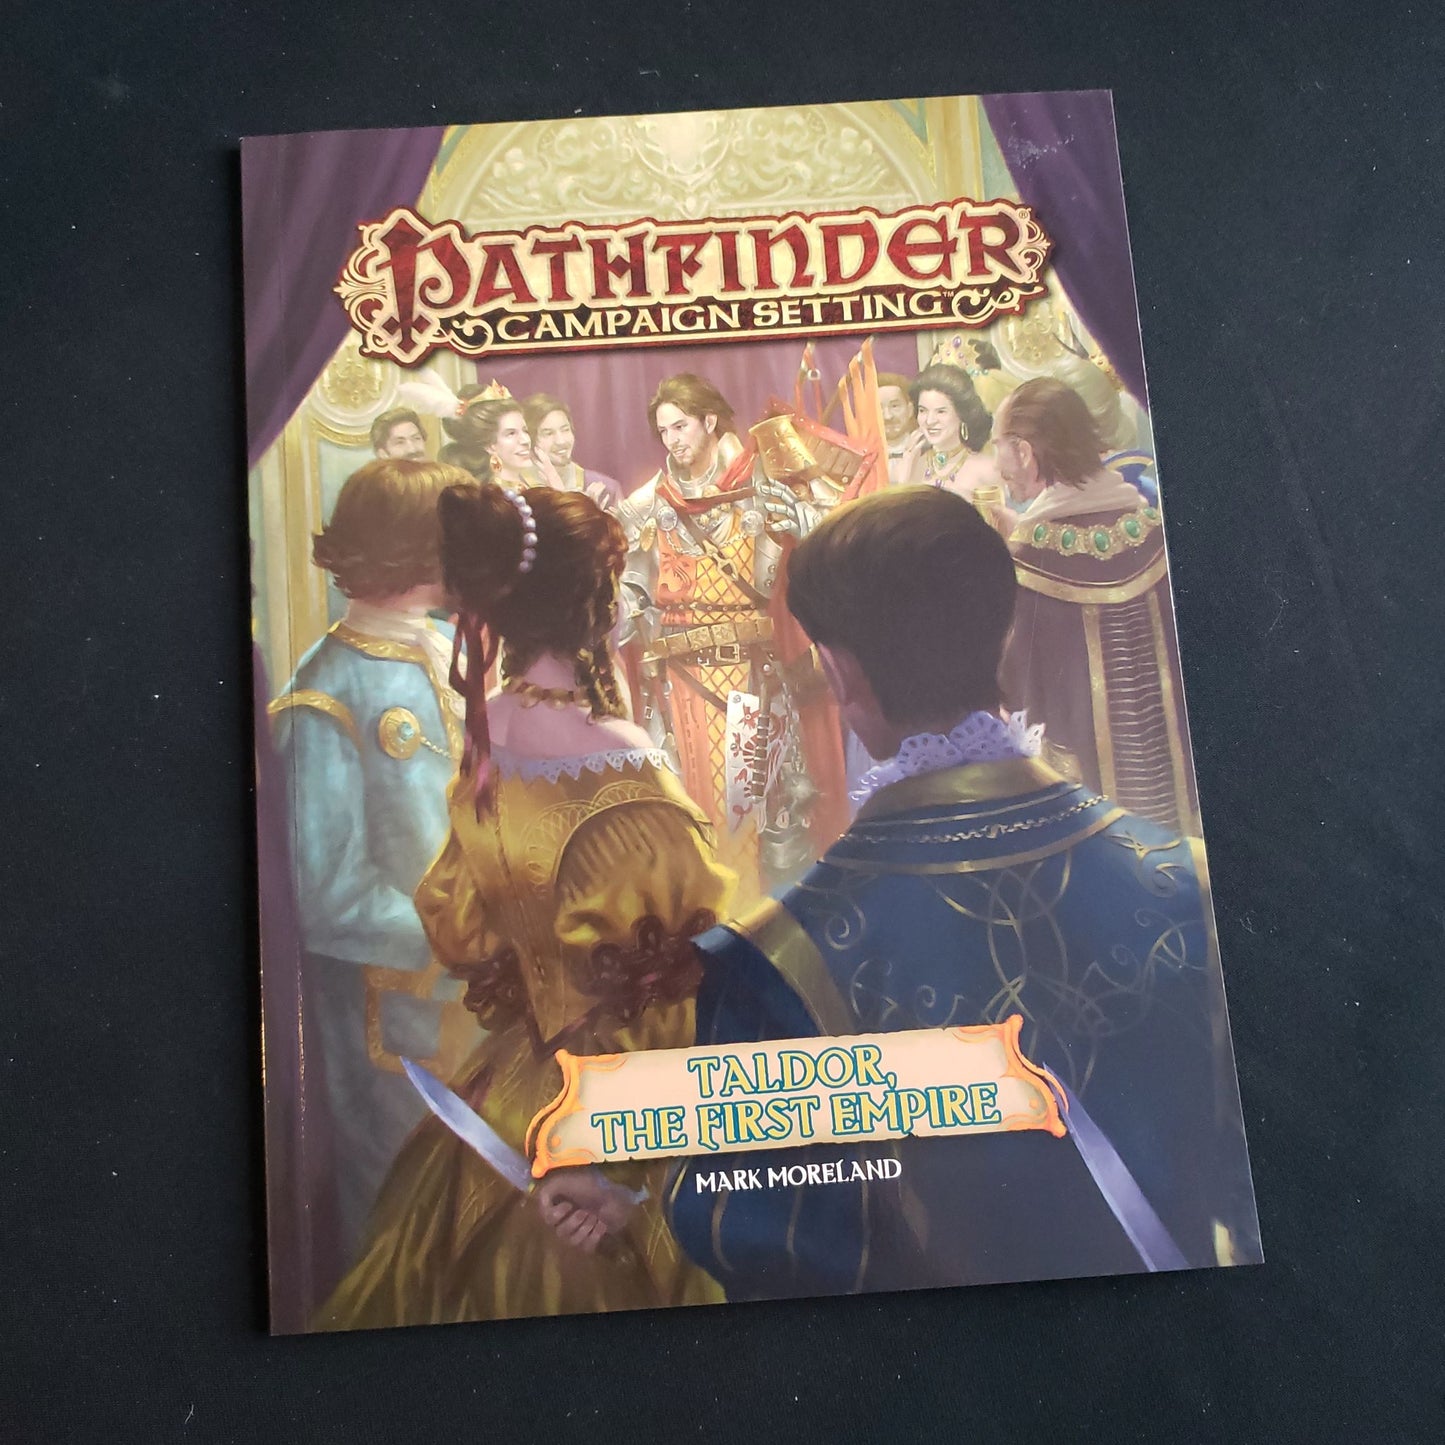 Image shows the front cover of the Taldor, the first Empire book for the Pathfinder First Edition roleplaying game